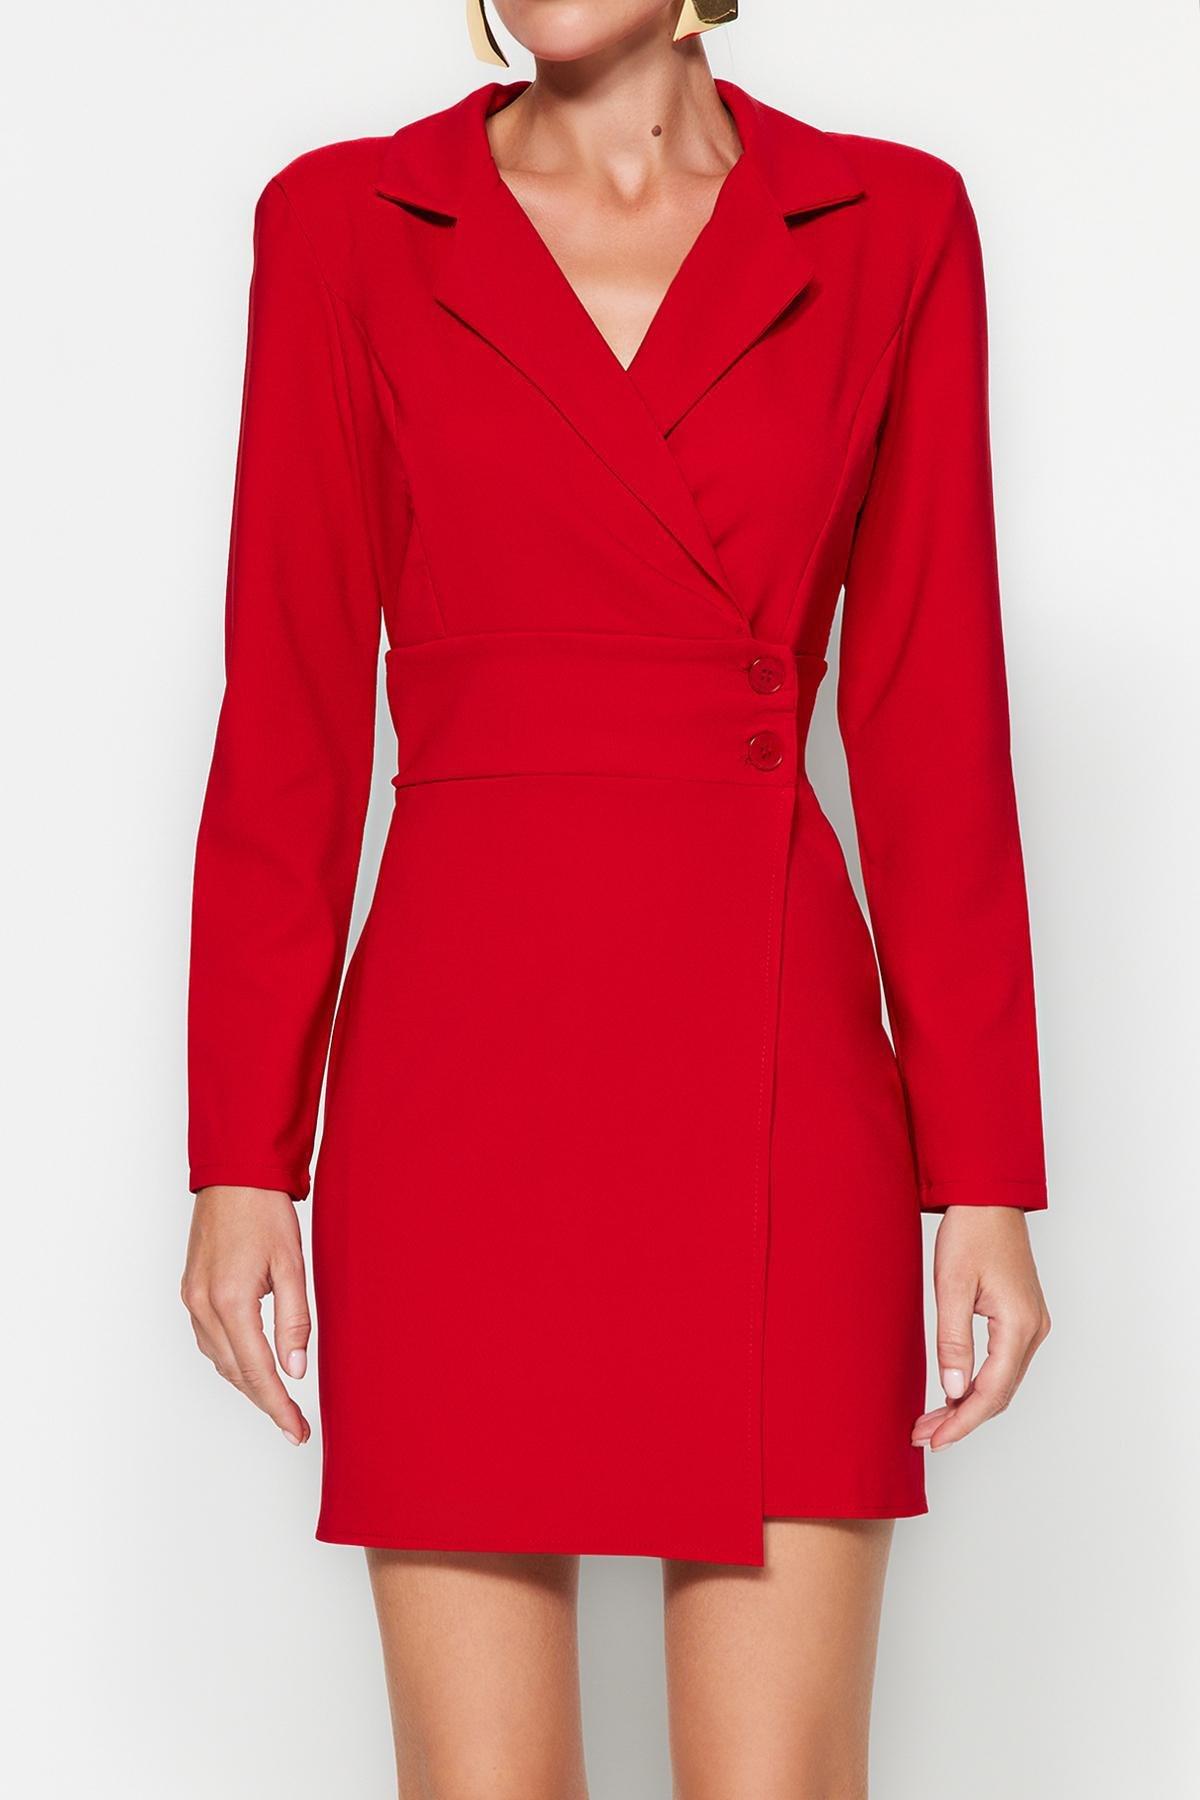 Trendyol - Red Buttoned Knitted Mini Jacket Dress